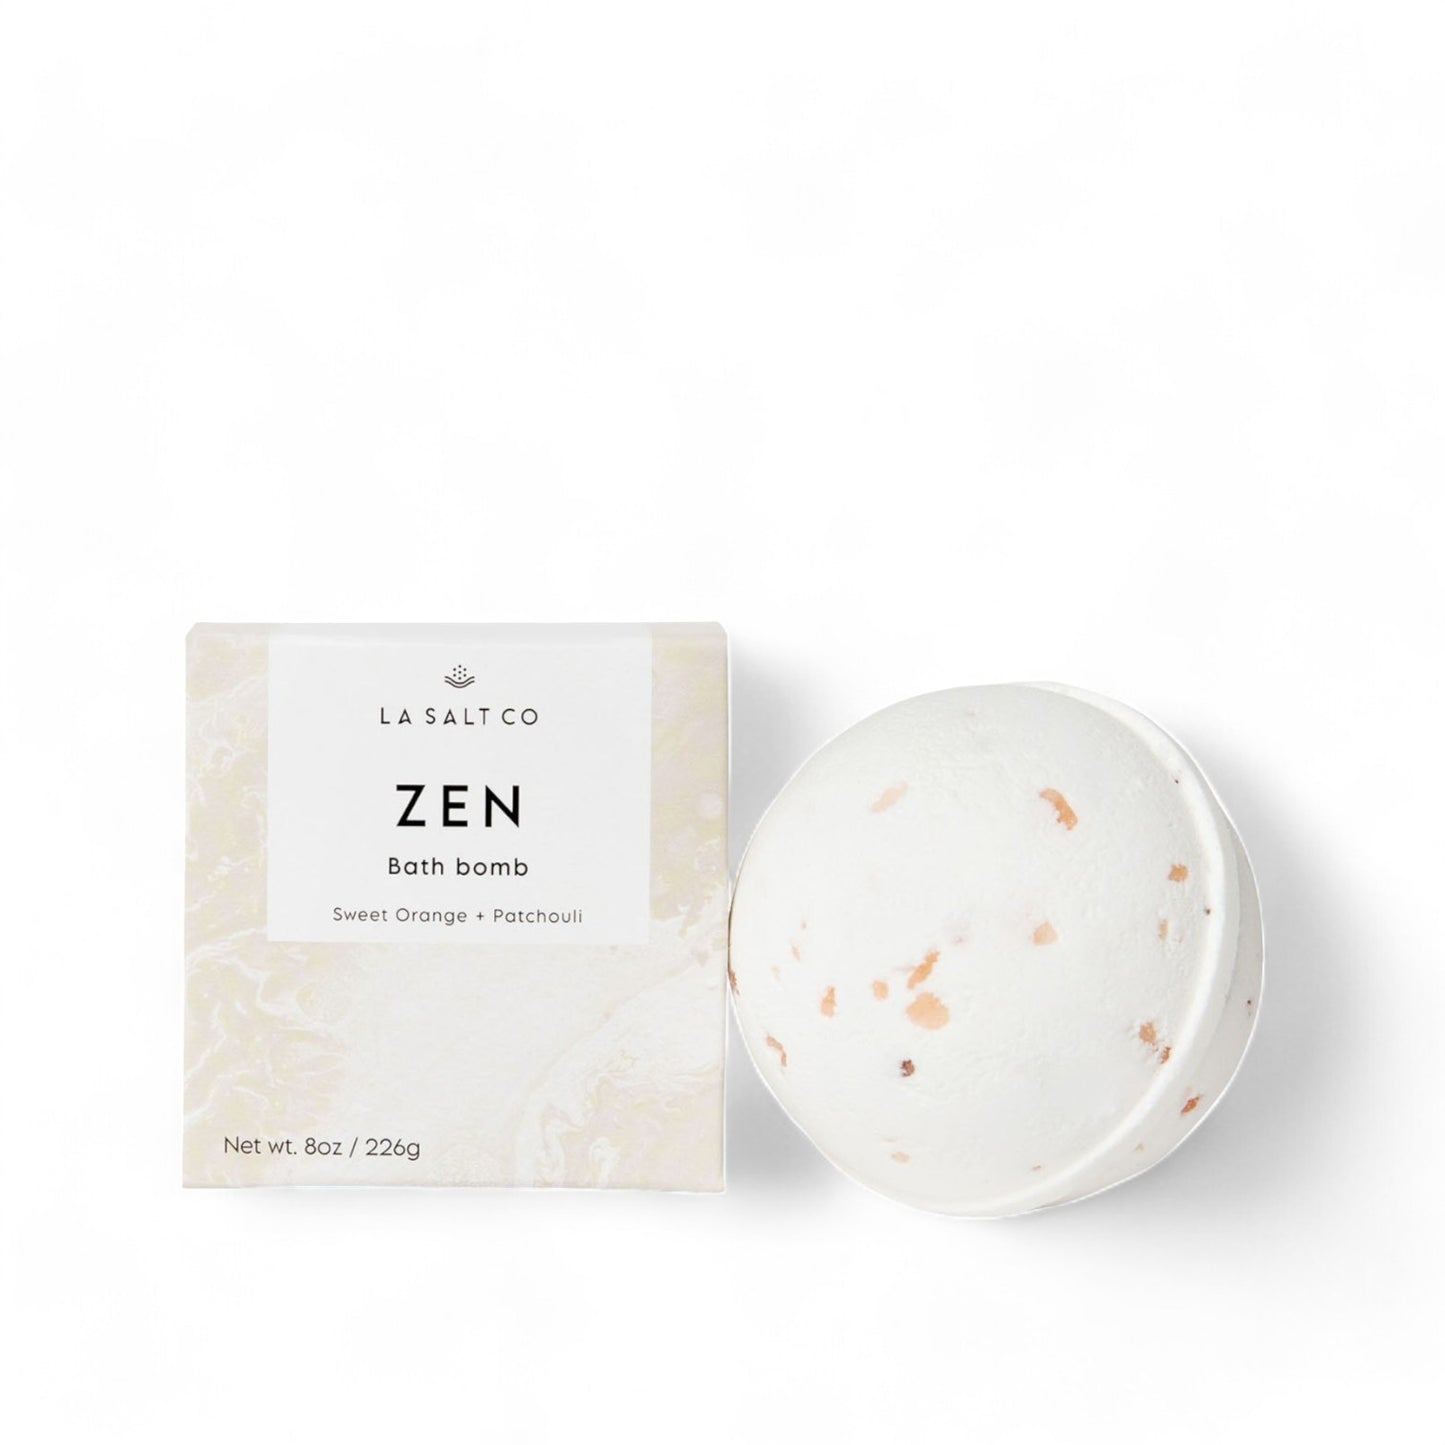 The Zen Bath Bomb next to the product box on white background